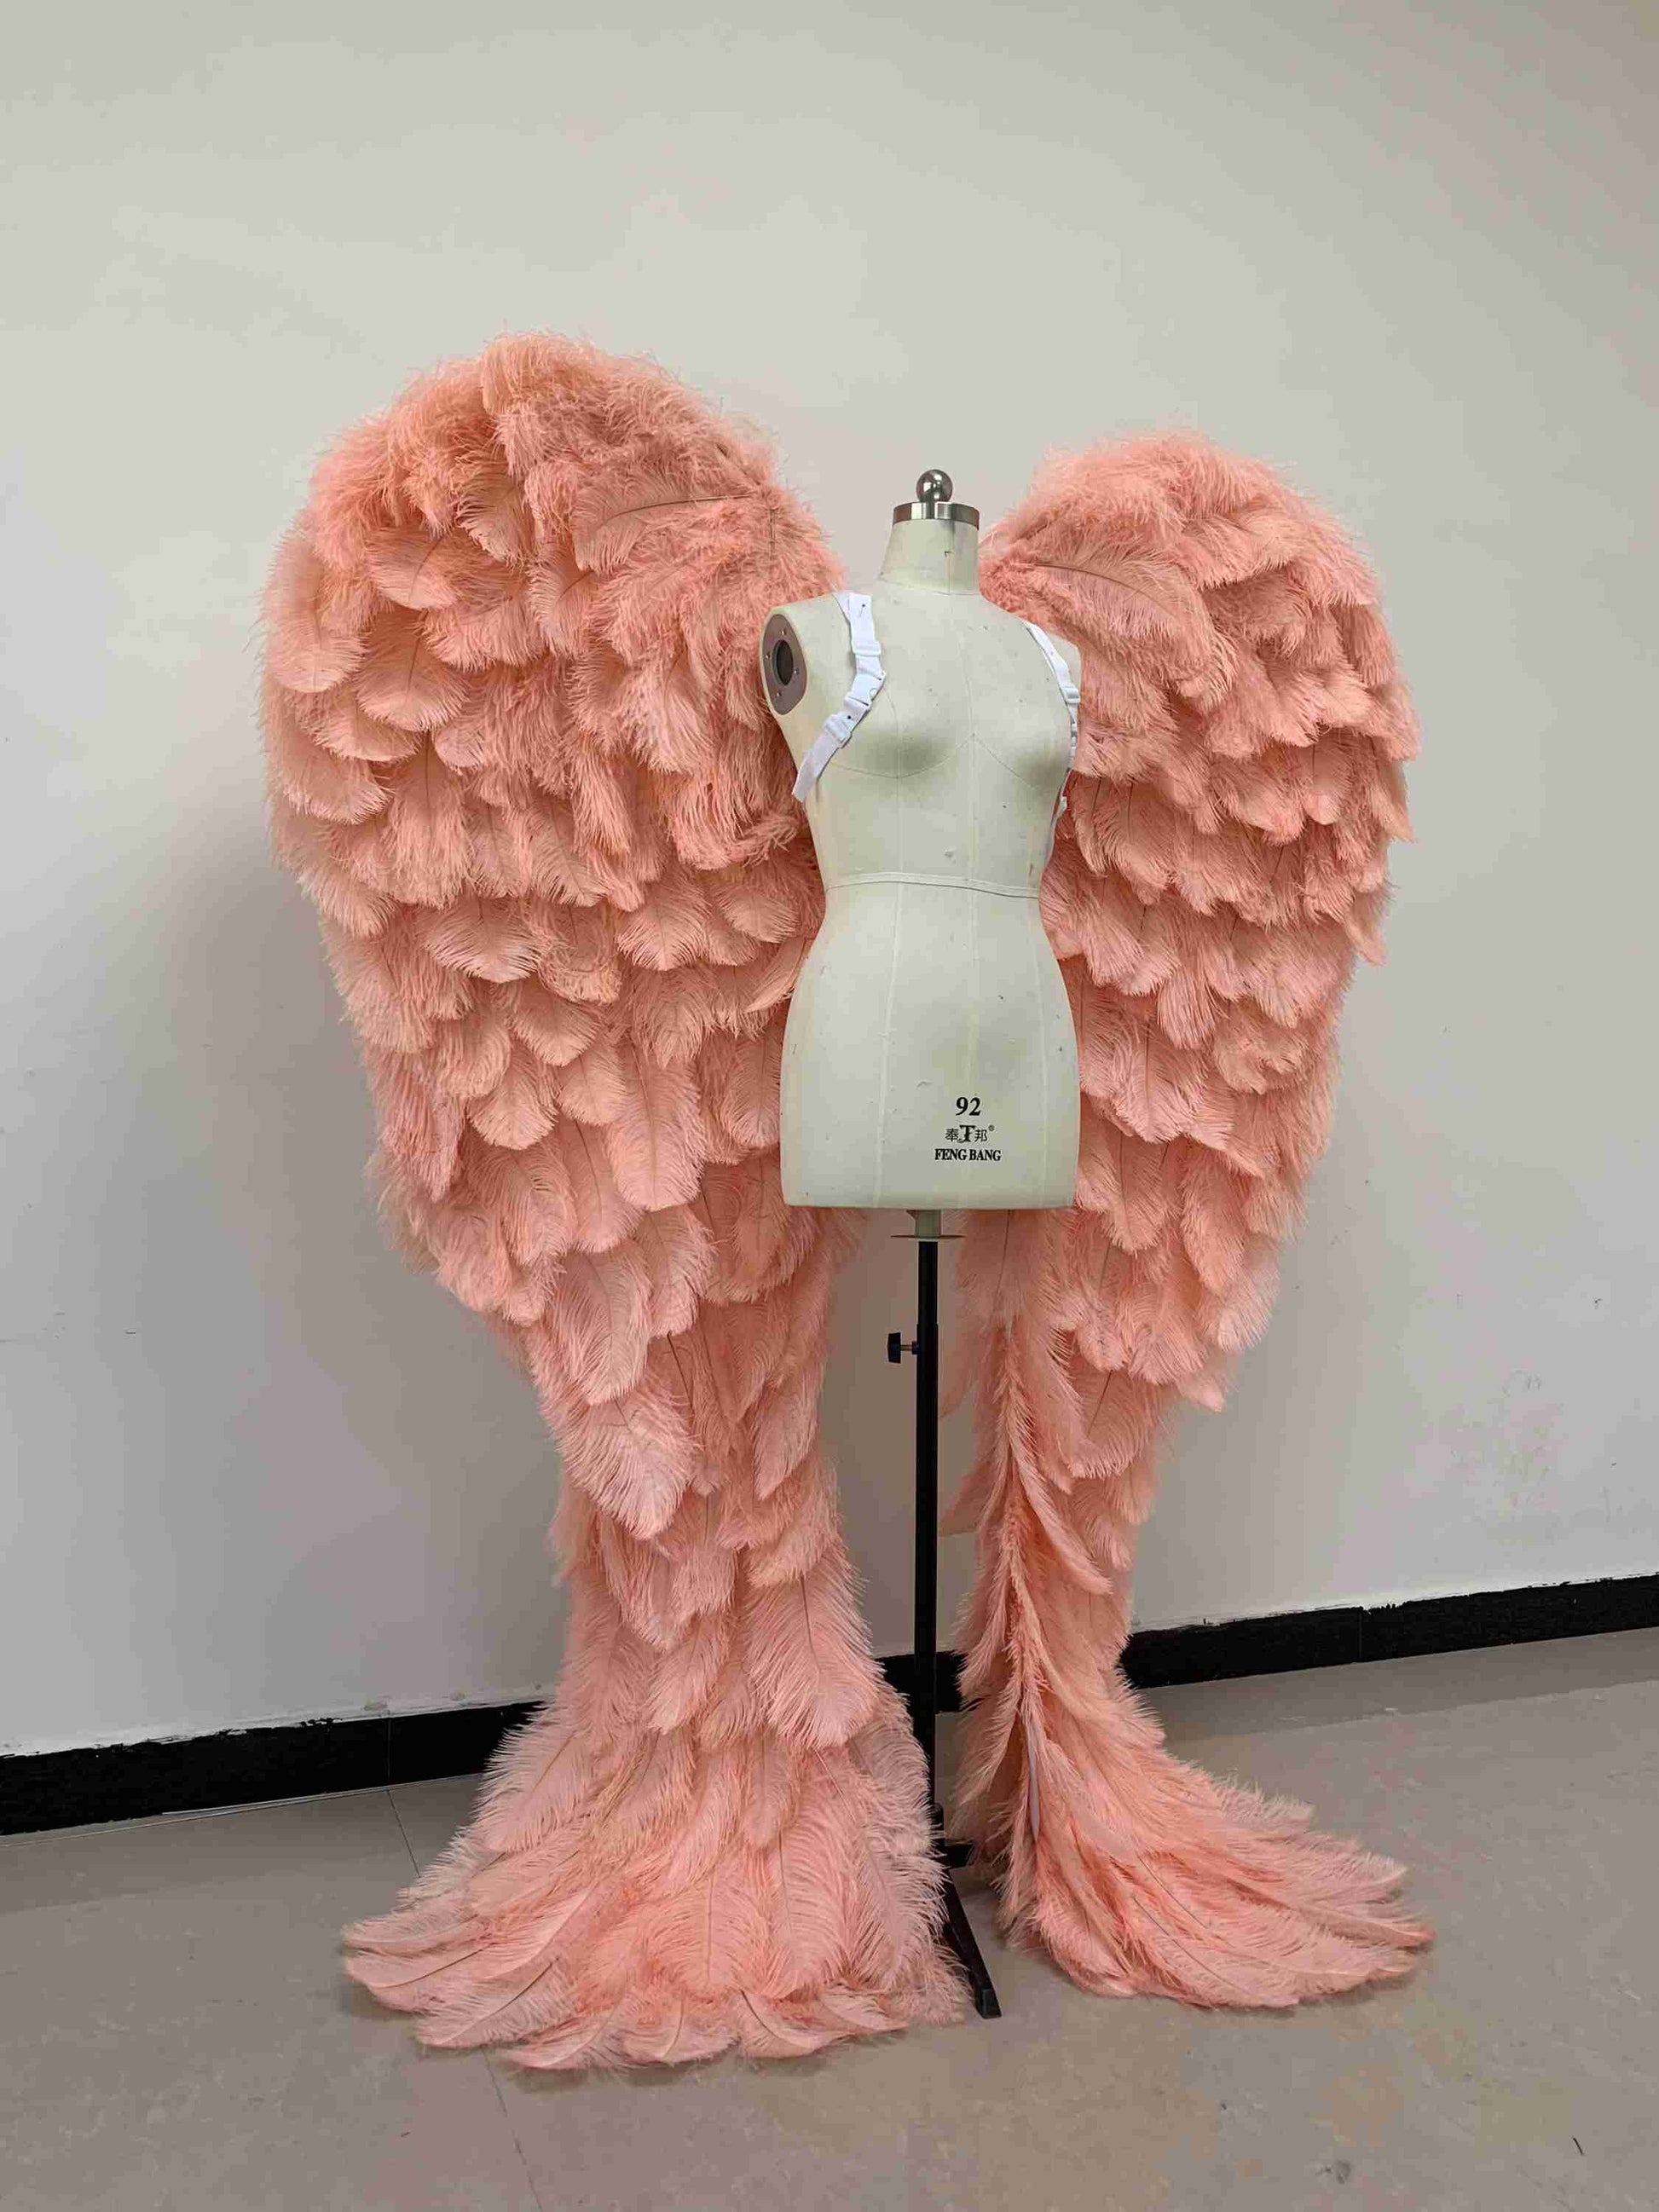 Our luxury pink angel wings from the right side. Made from ostrich feathers. Wings for angel costume. Suitable for photoshoots especially for boudoirs.